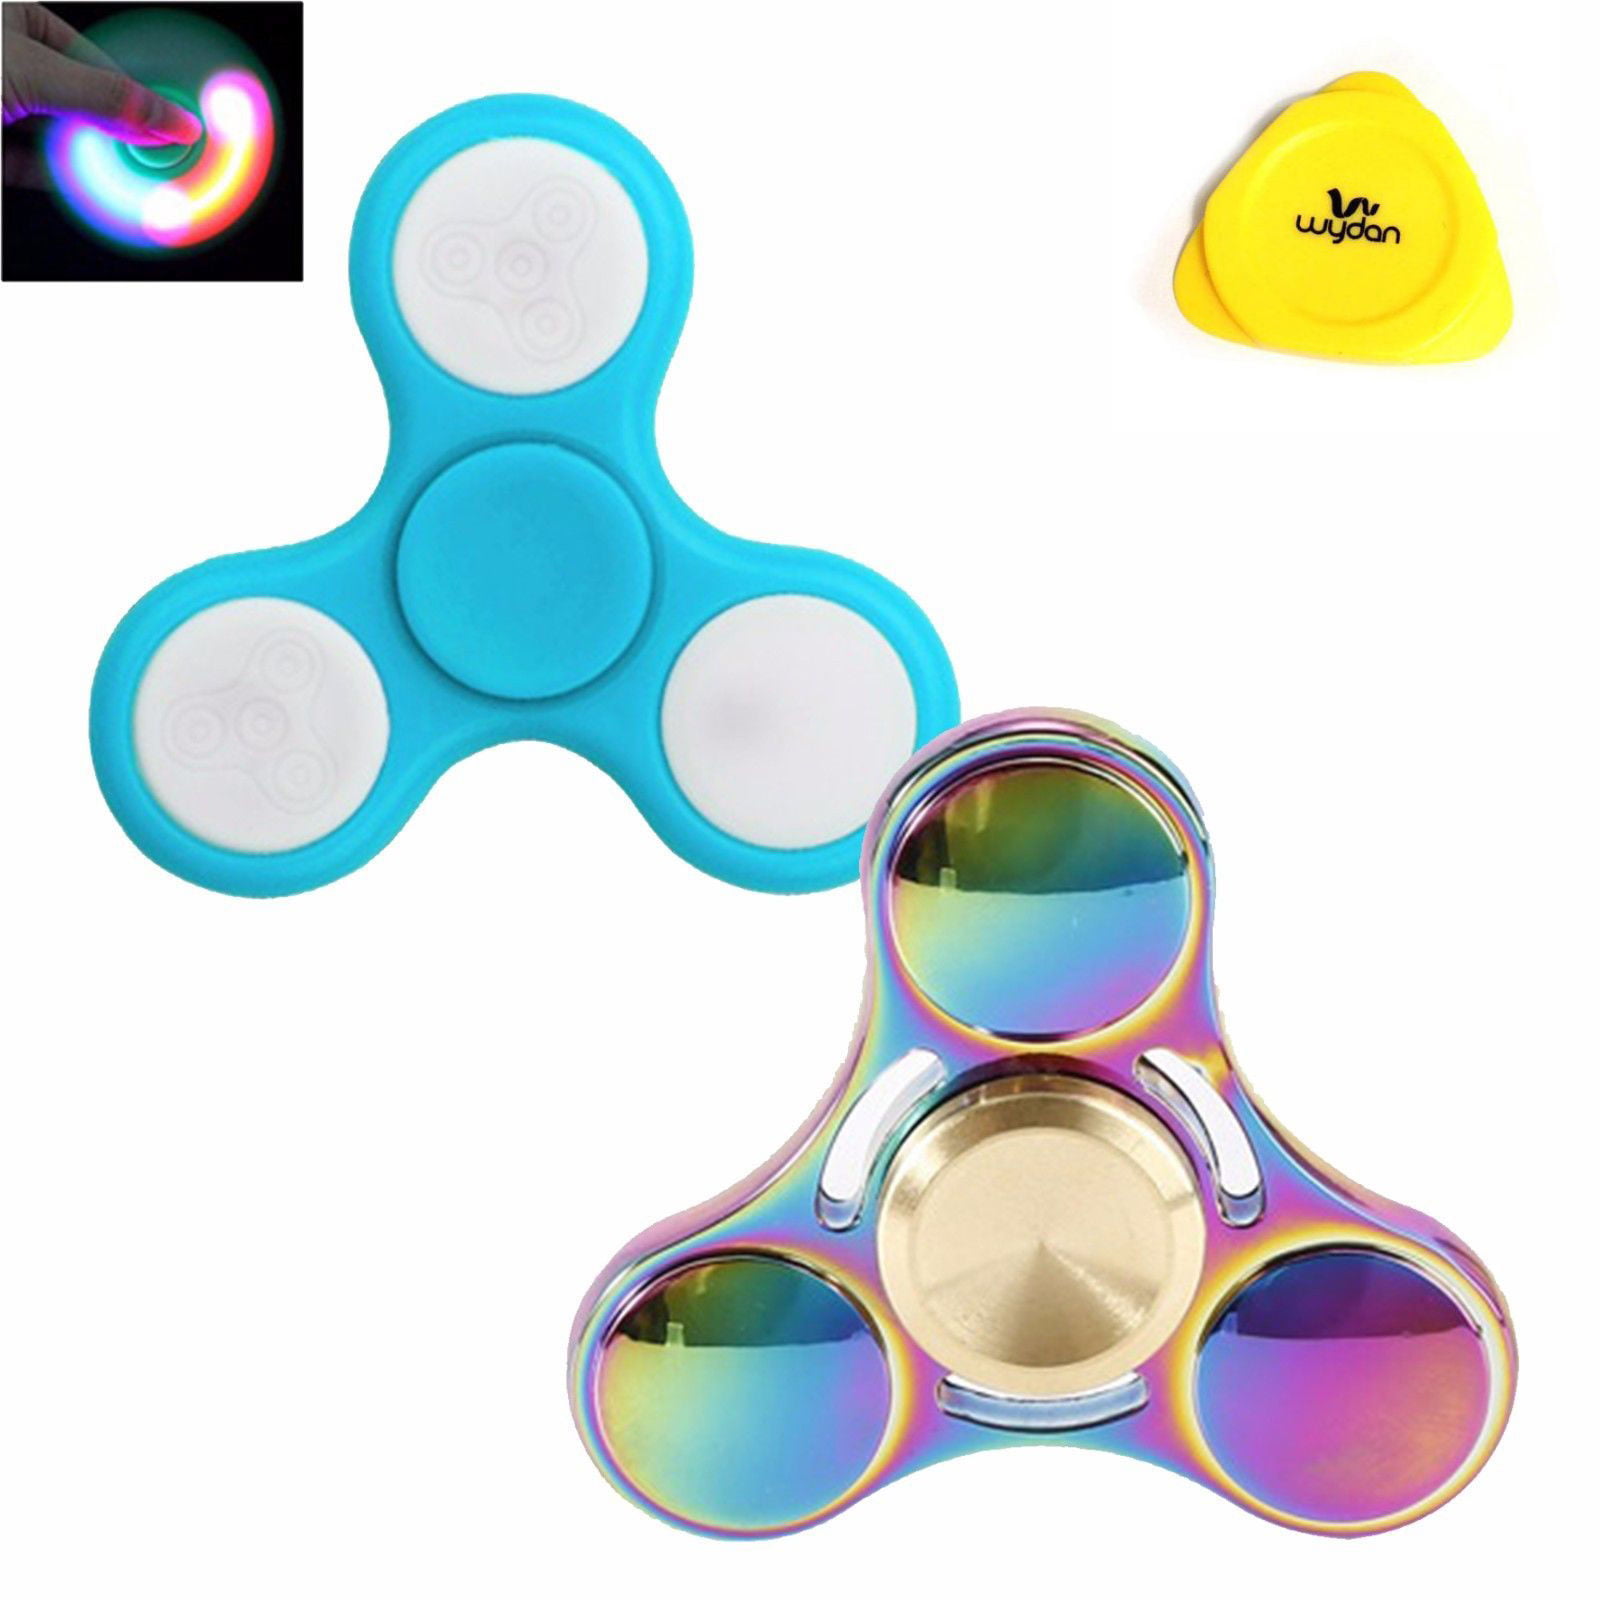 Details about   Rainbow Alien Fidget Spinner Toy All Metal Boys Girls Kids Adults ADHD Focus EDC 